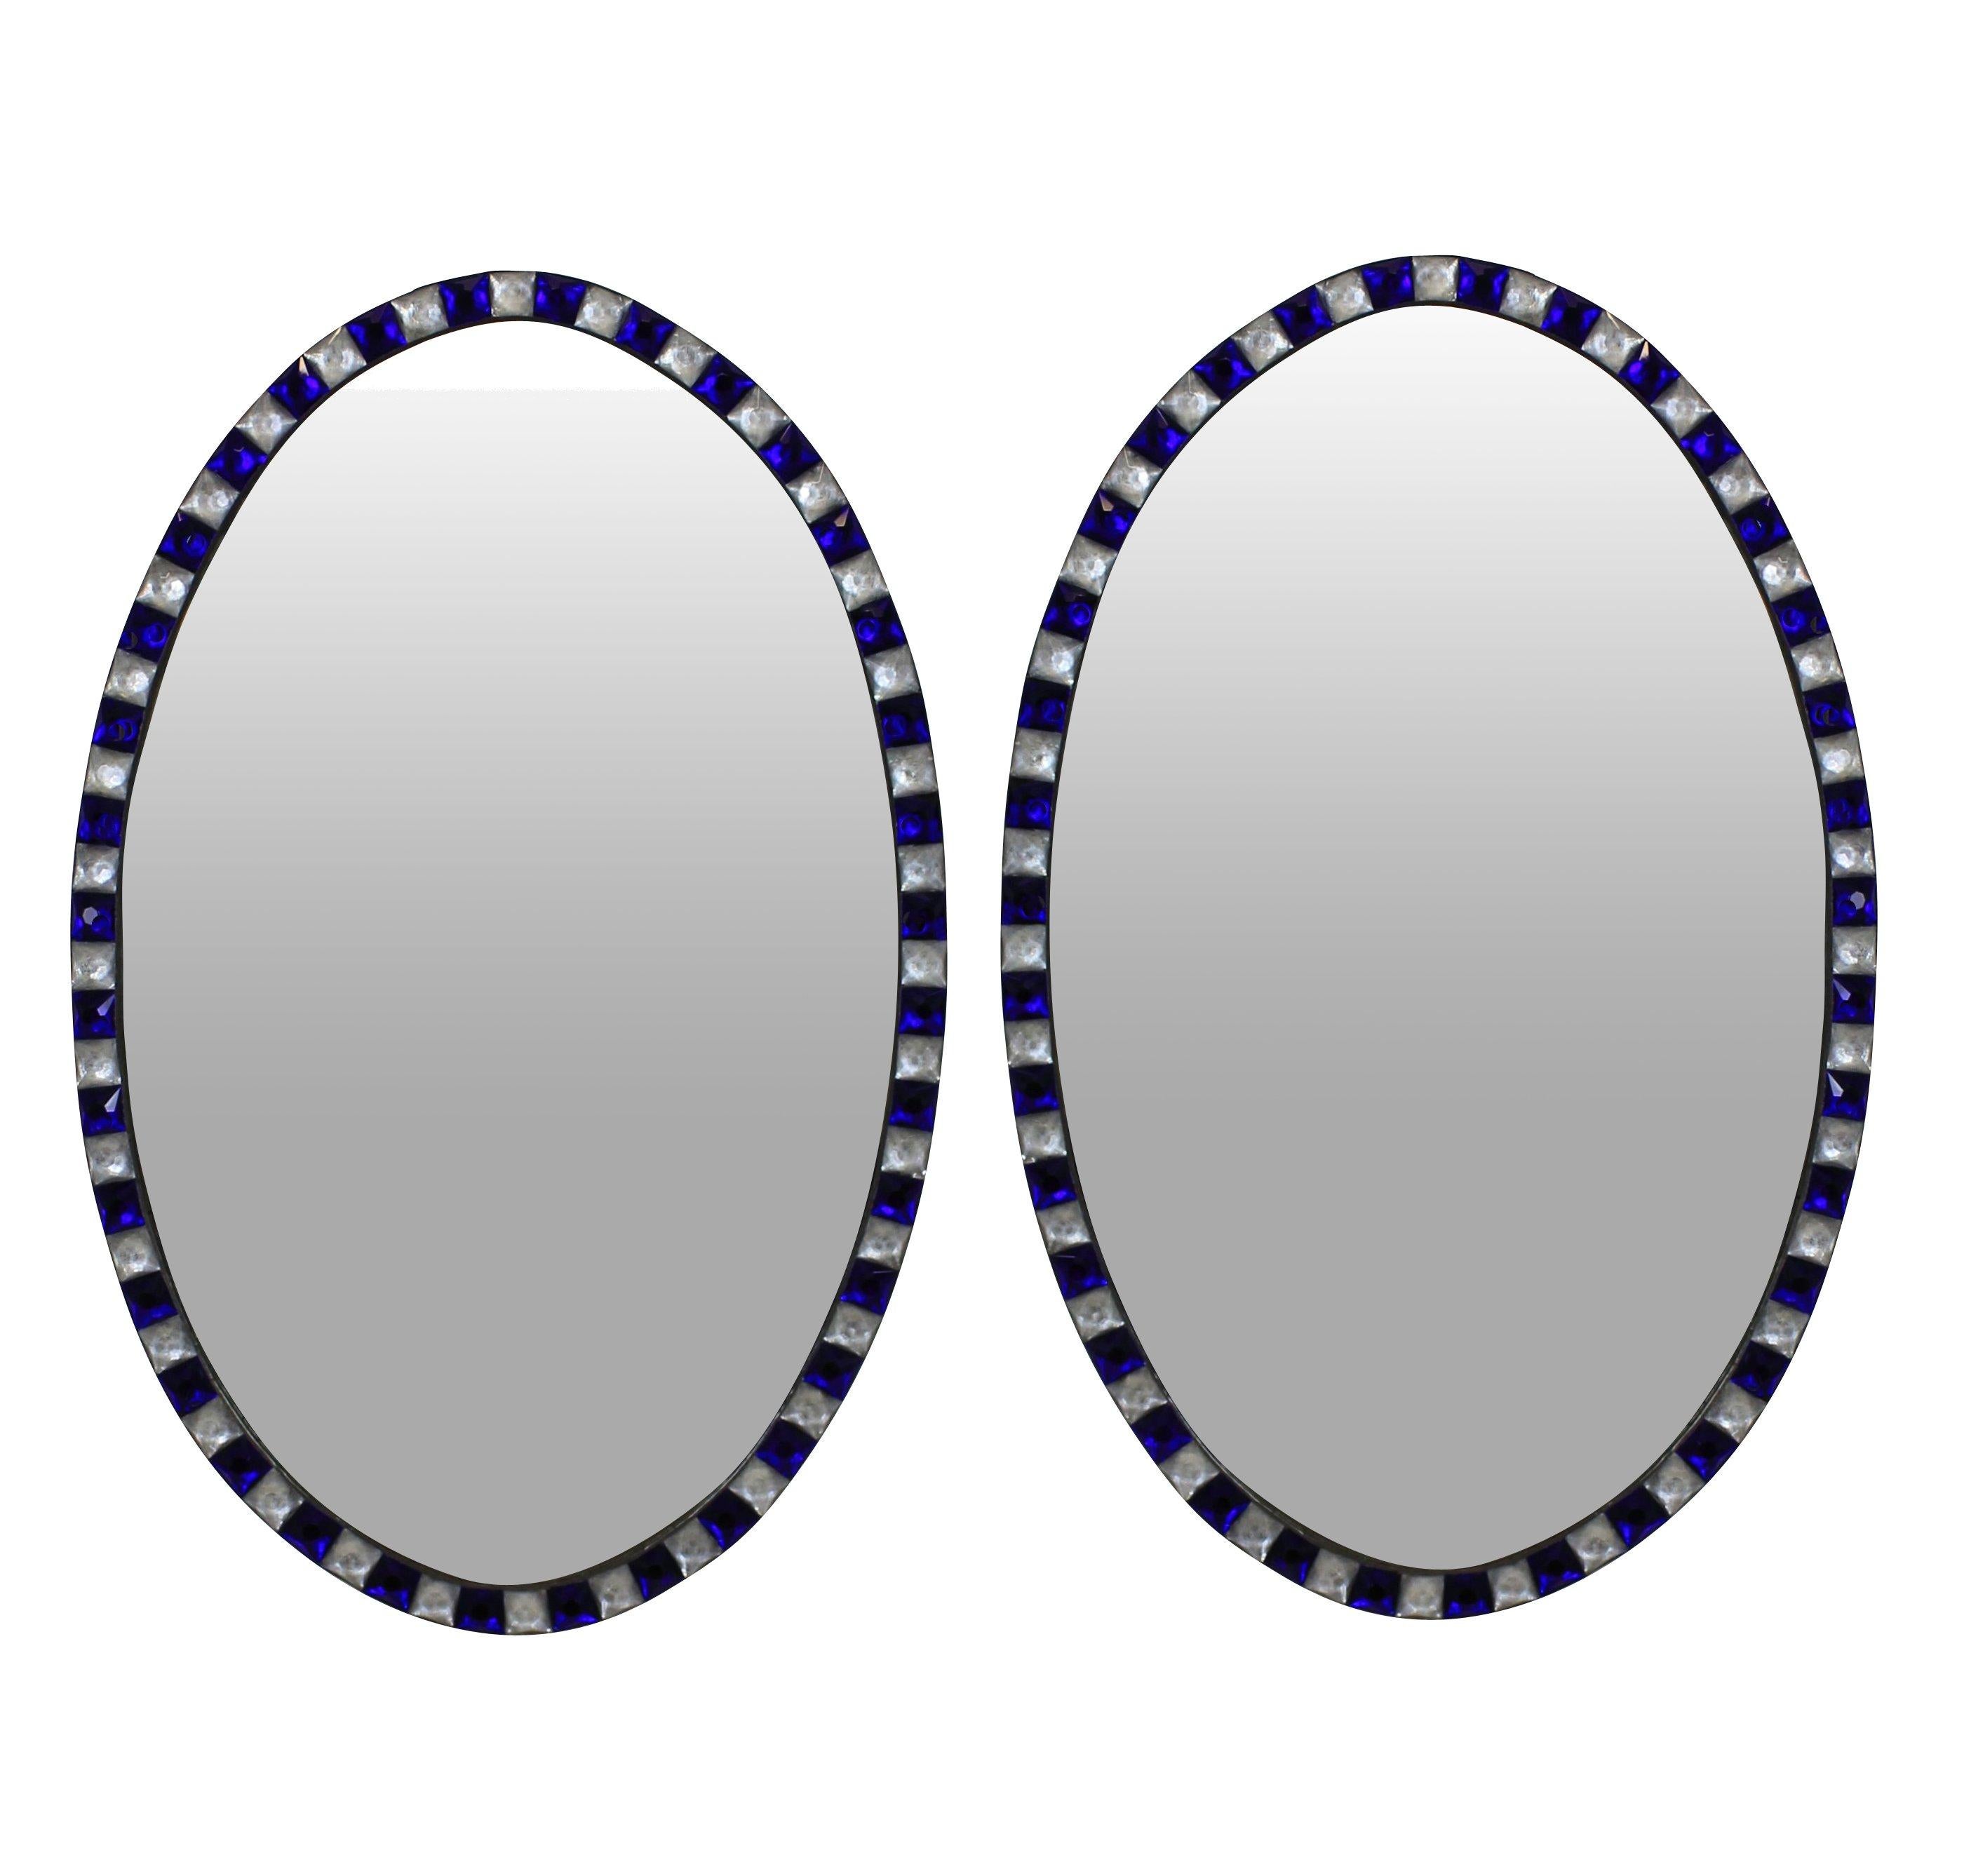 Pair of Stunning Irish Mirrors with Faceted Rock Crystal and Blue Glass Borders (Geschliffenes Glas)